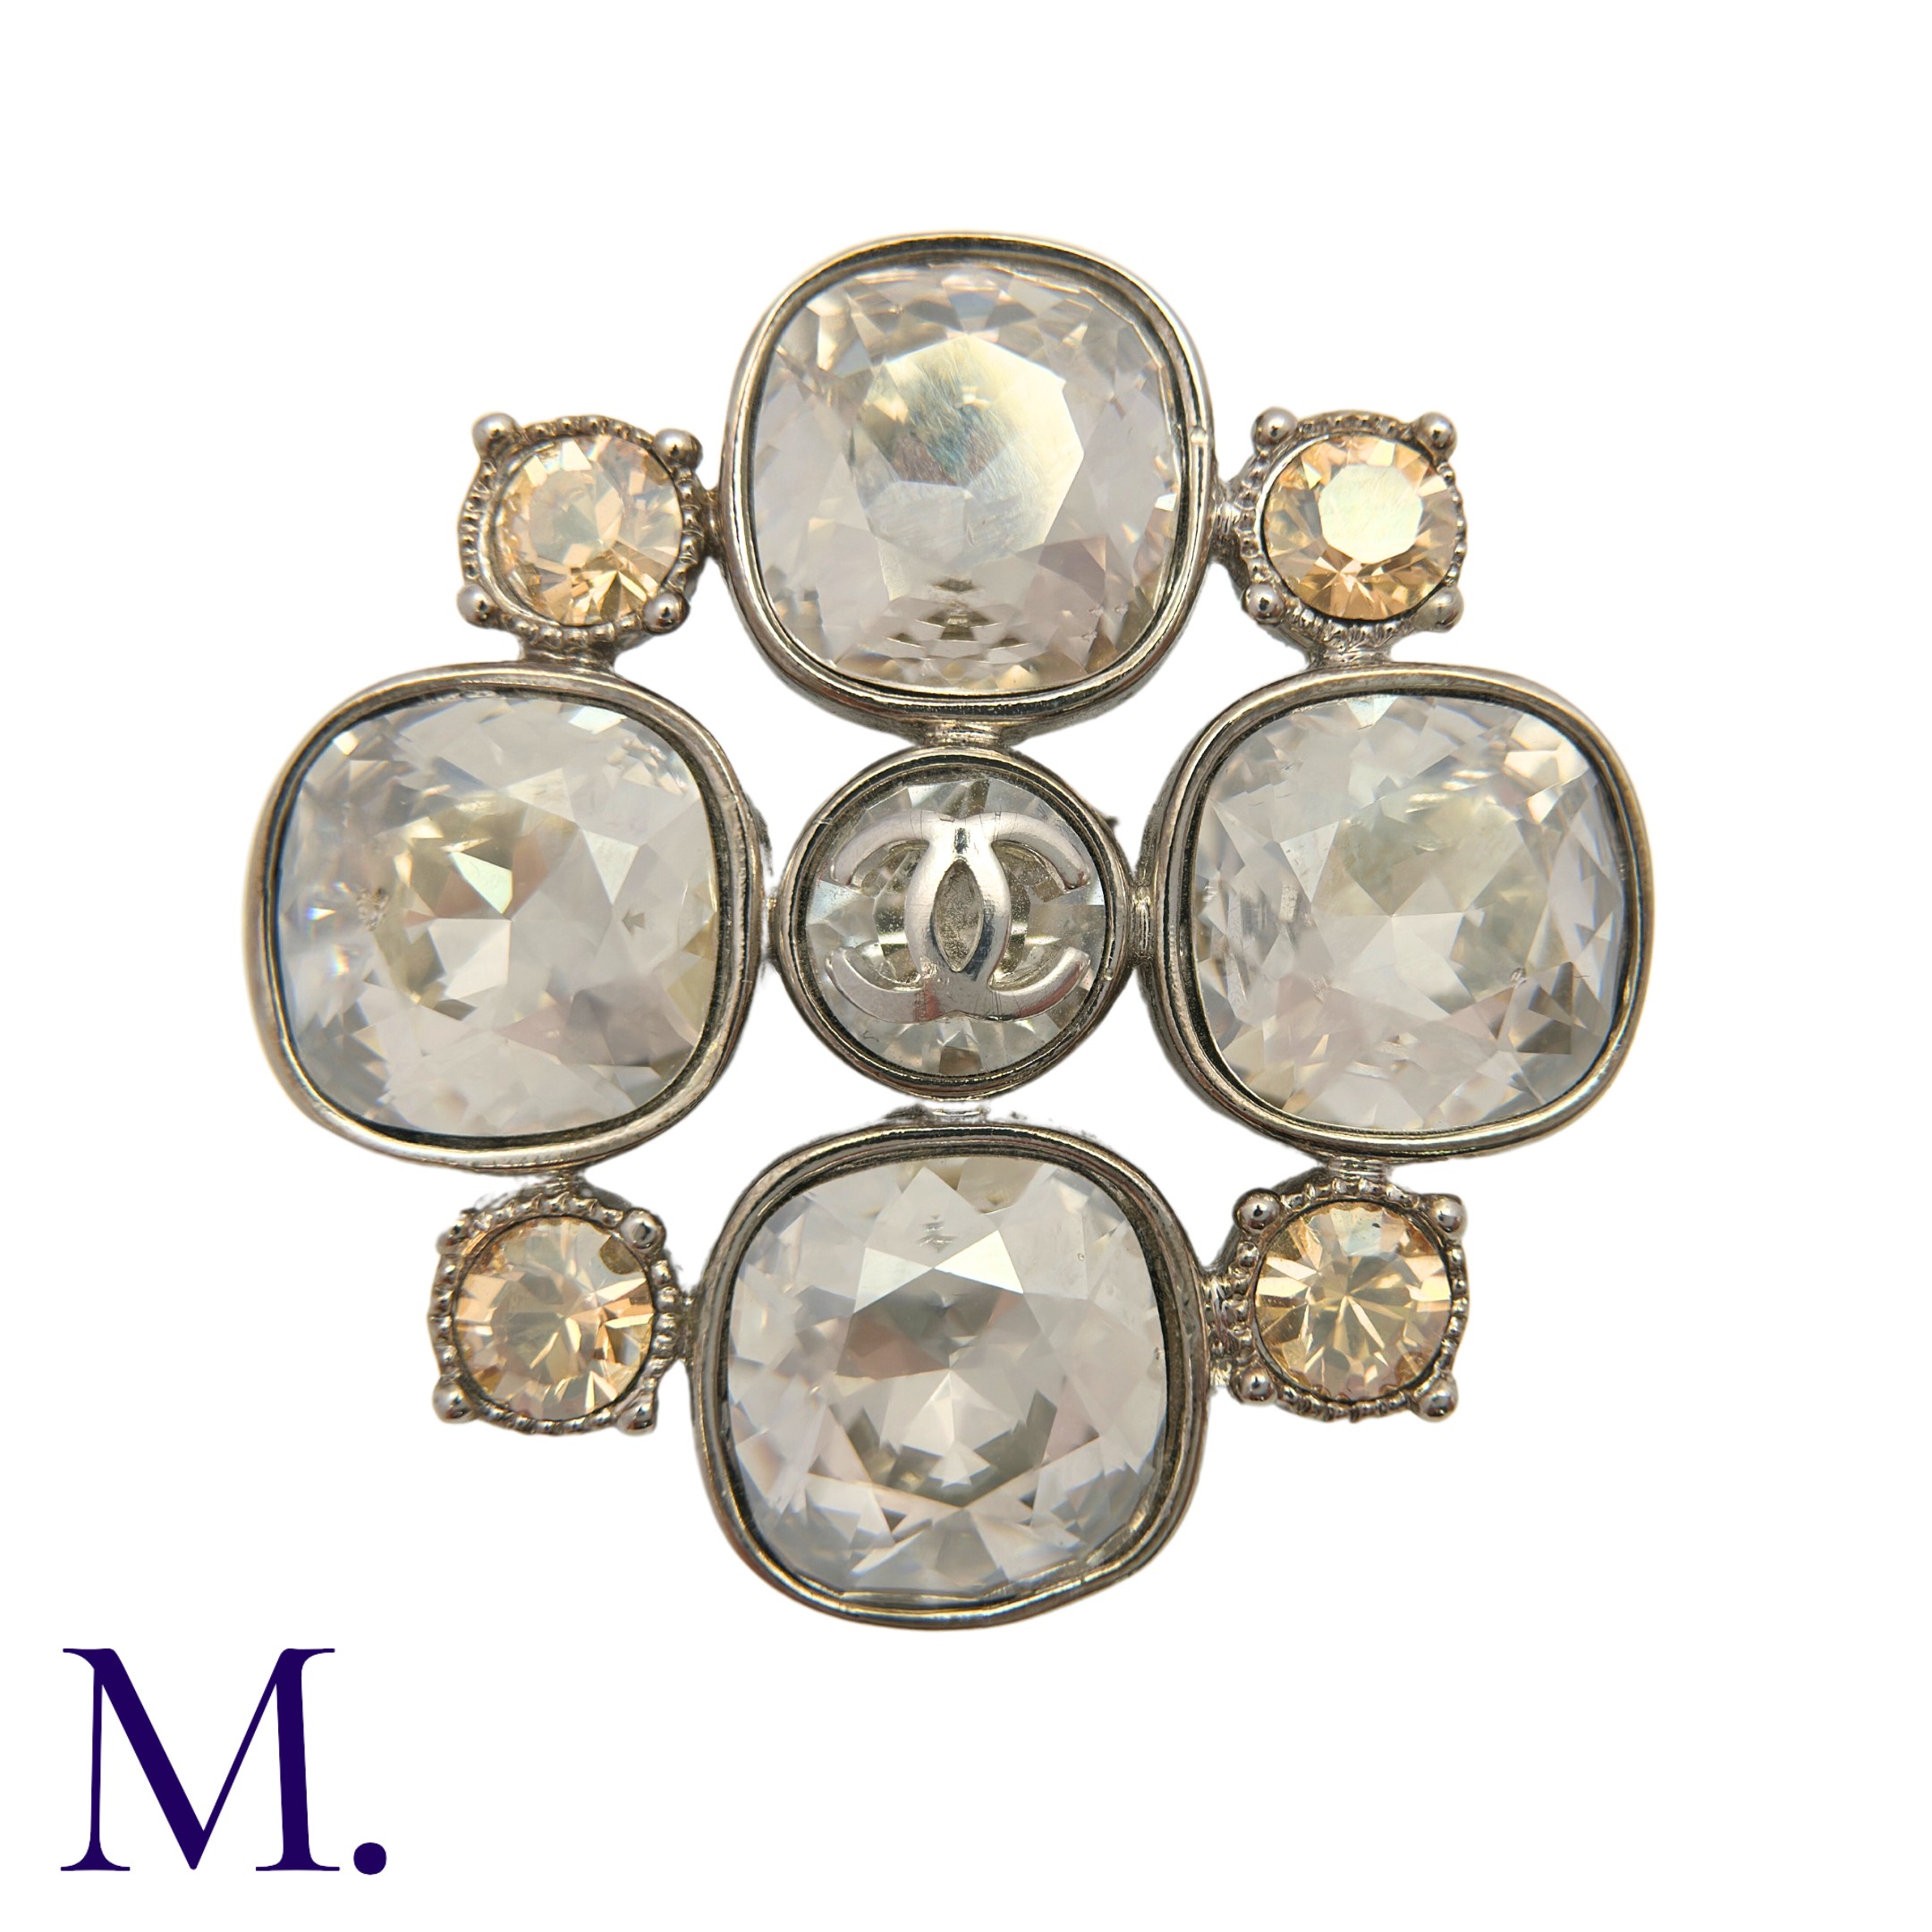 CHANEL. A Costume Brooch in quatrefoil form, set with large light lilac stones to the cardinal